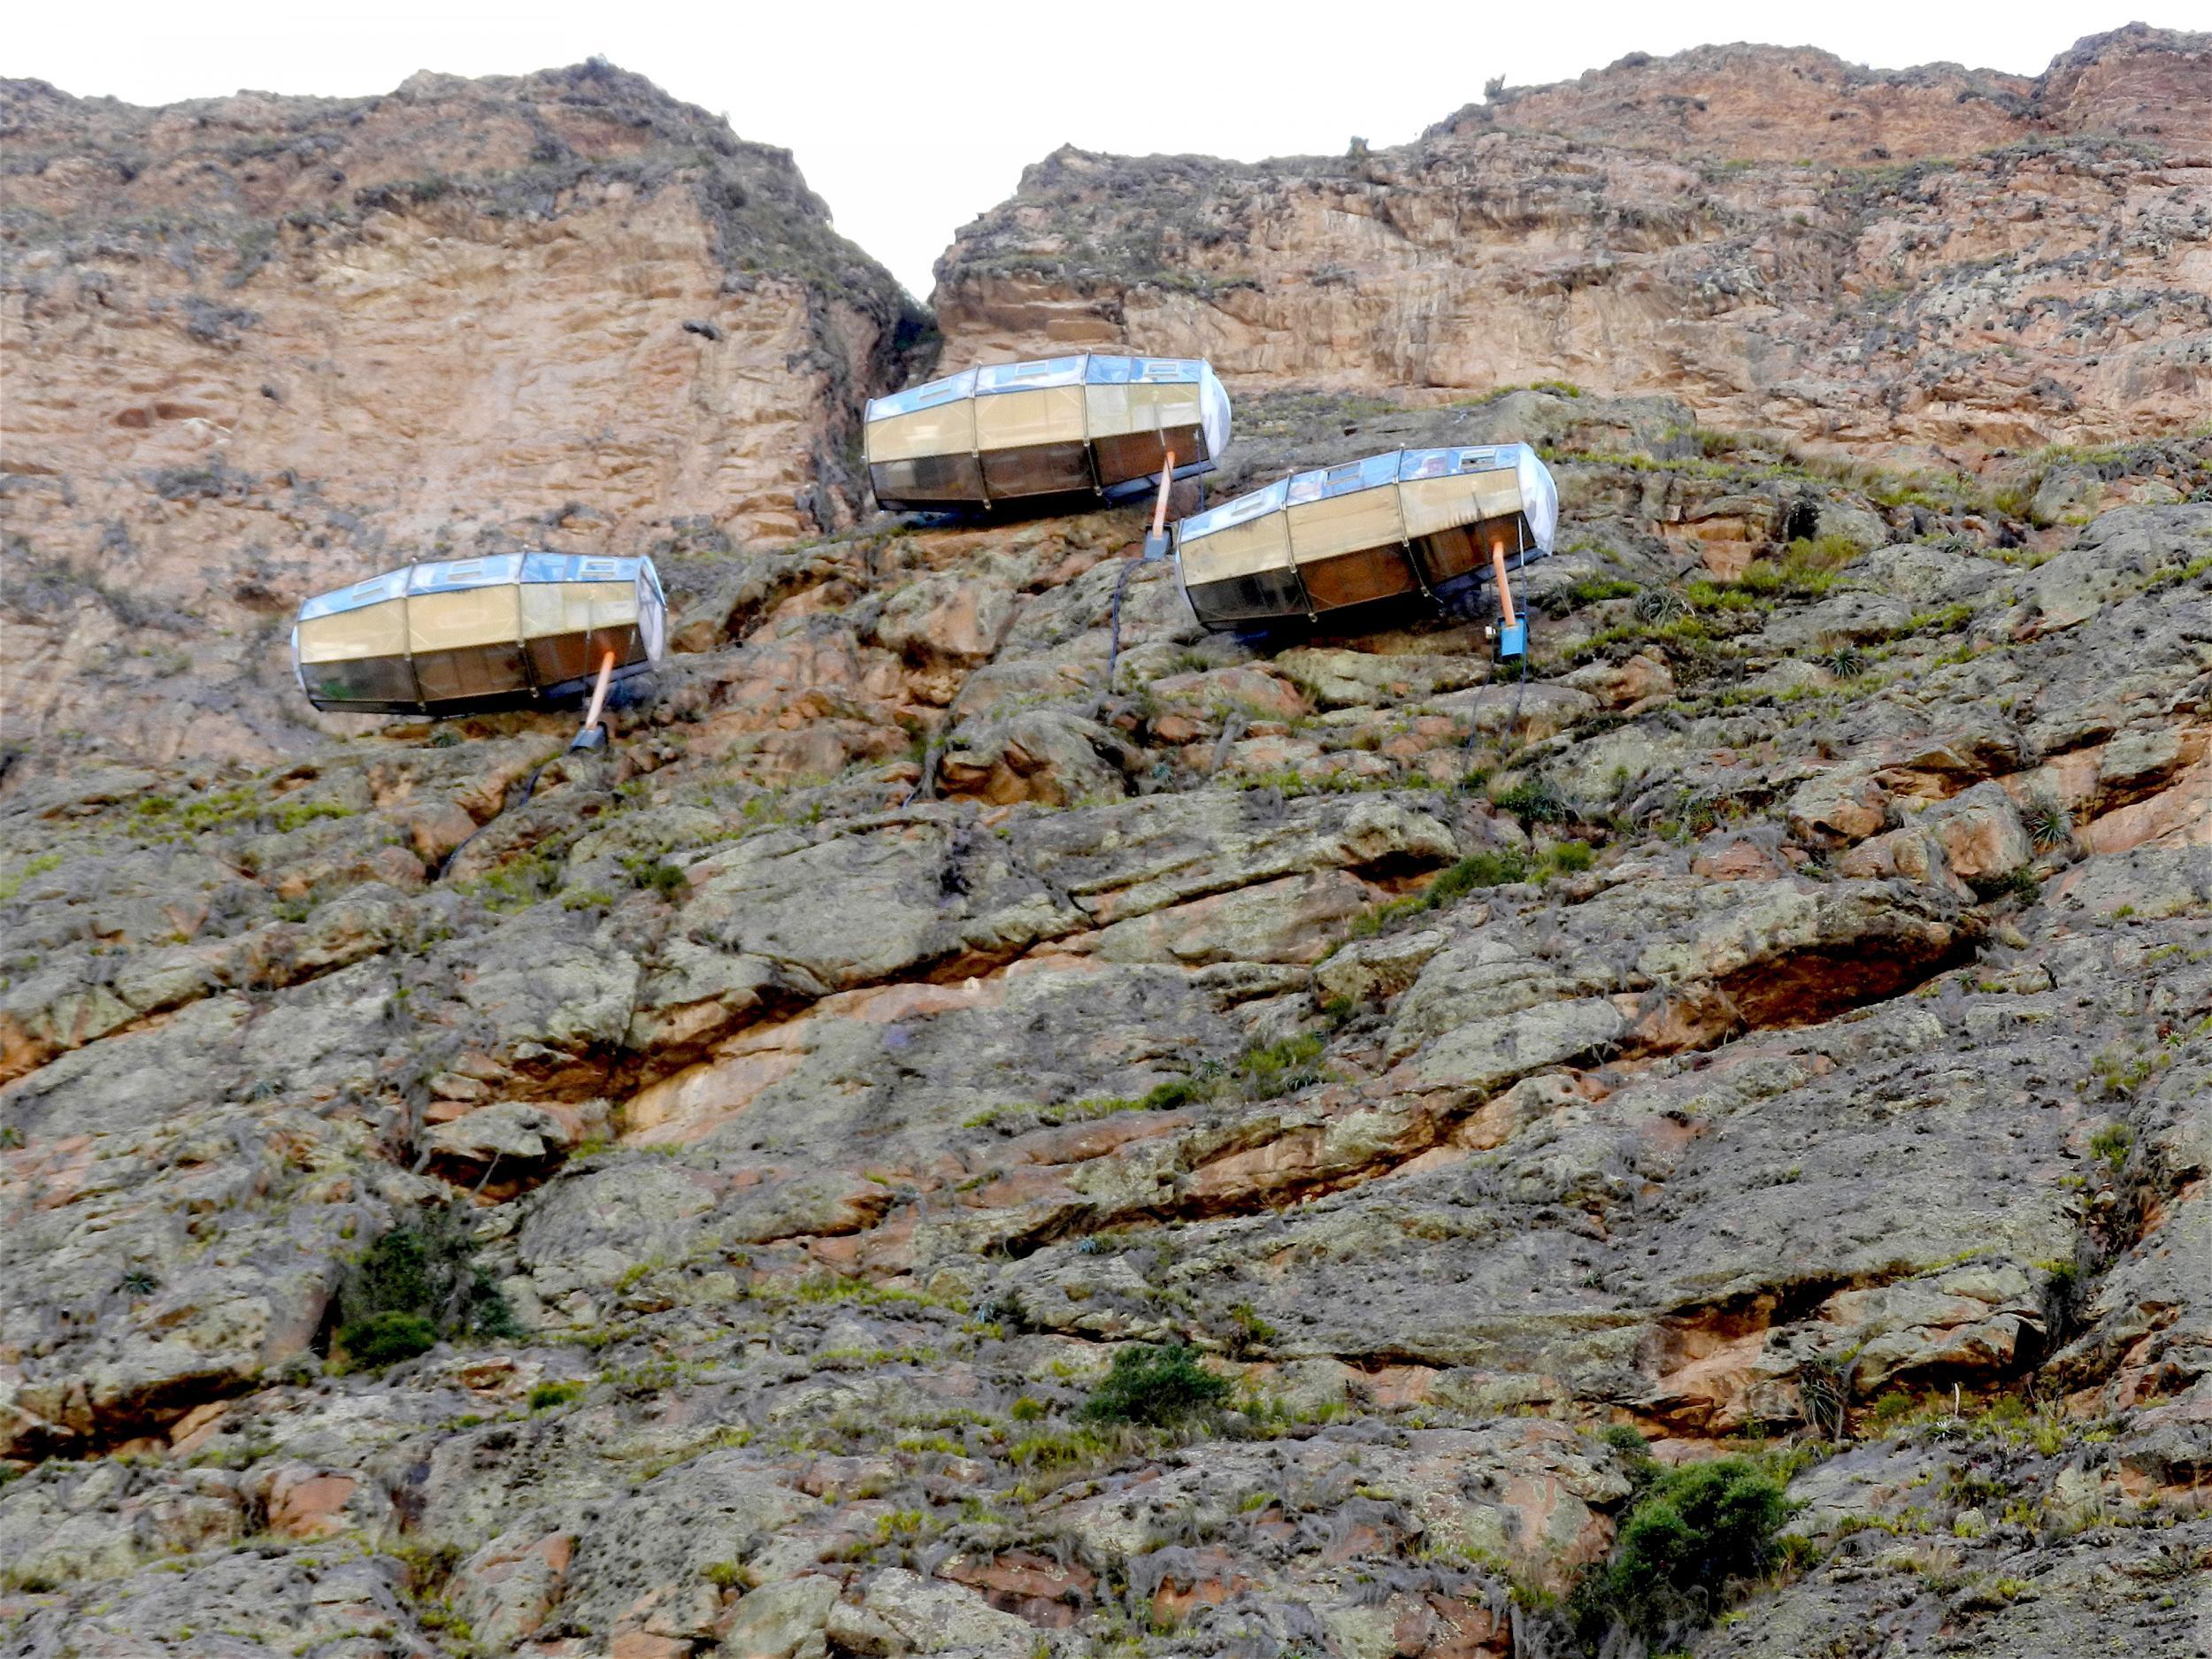 The Skylodge Adventure Suites, suspended from the side of the mountain